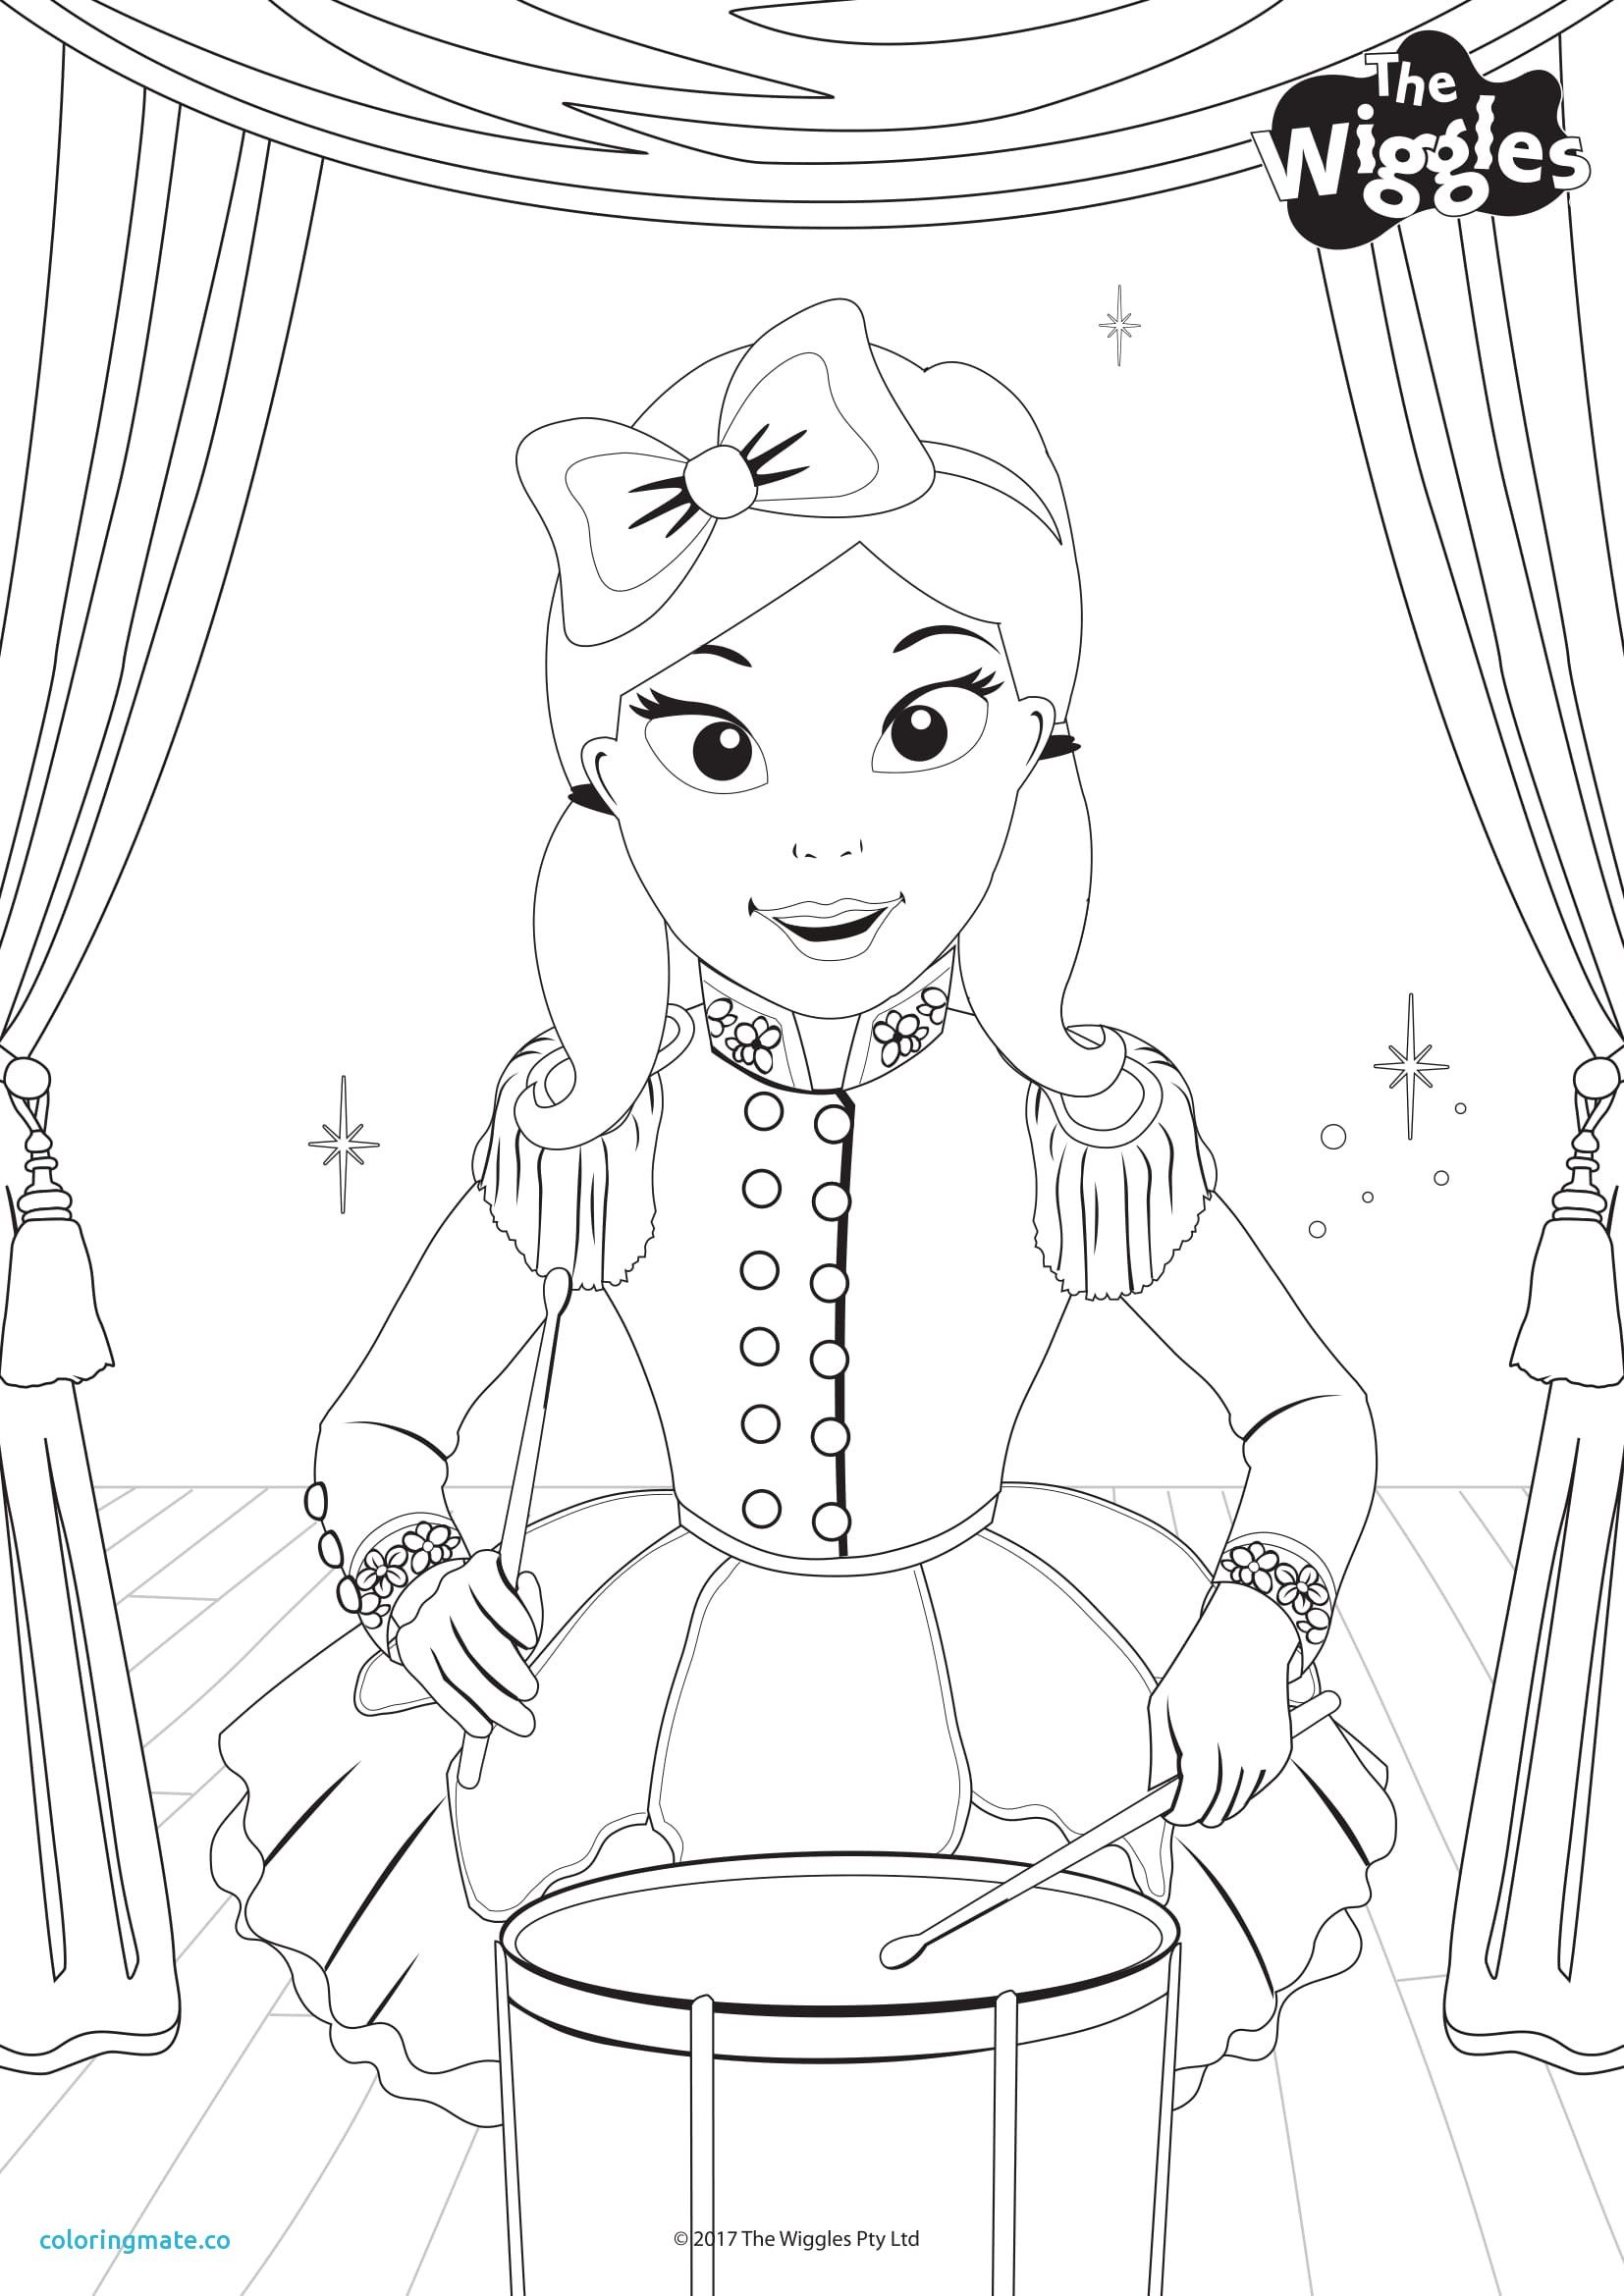 The Wiggles Coloring Pages Lovely Activity Color Emma Performer Ready  Steady Wiggle Sprout Of Coloriafes Disney | Wiggles birthday, Emma wiggle, Coloring  pages